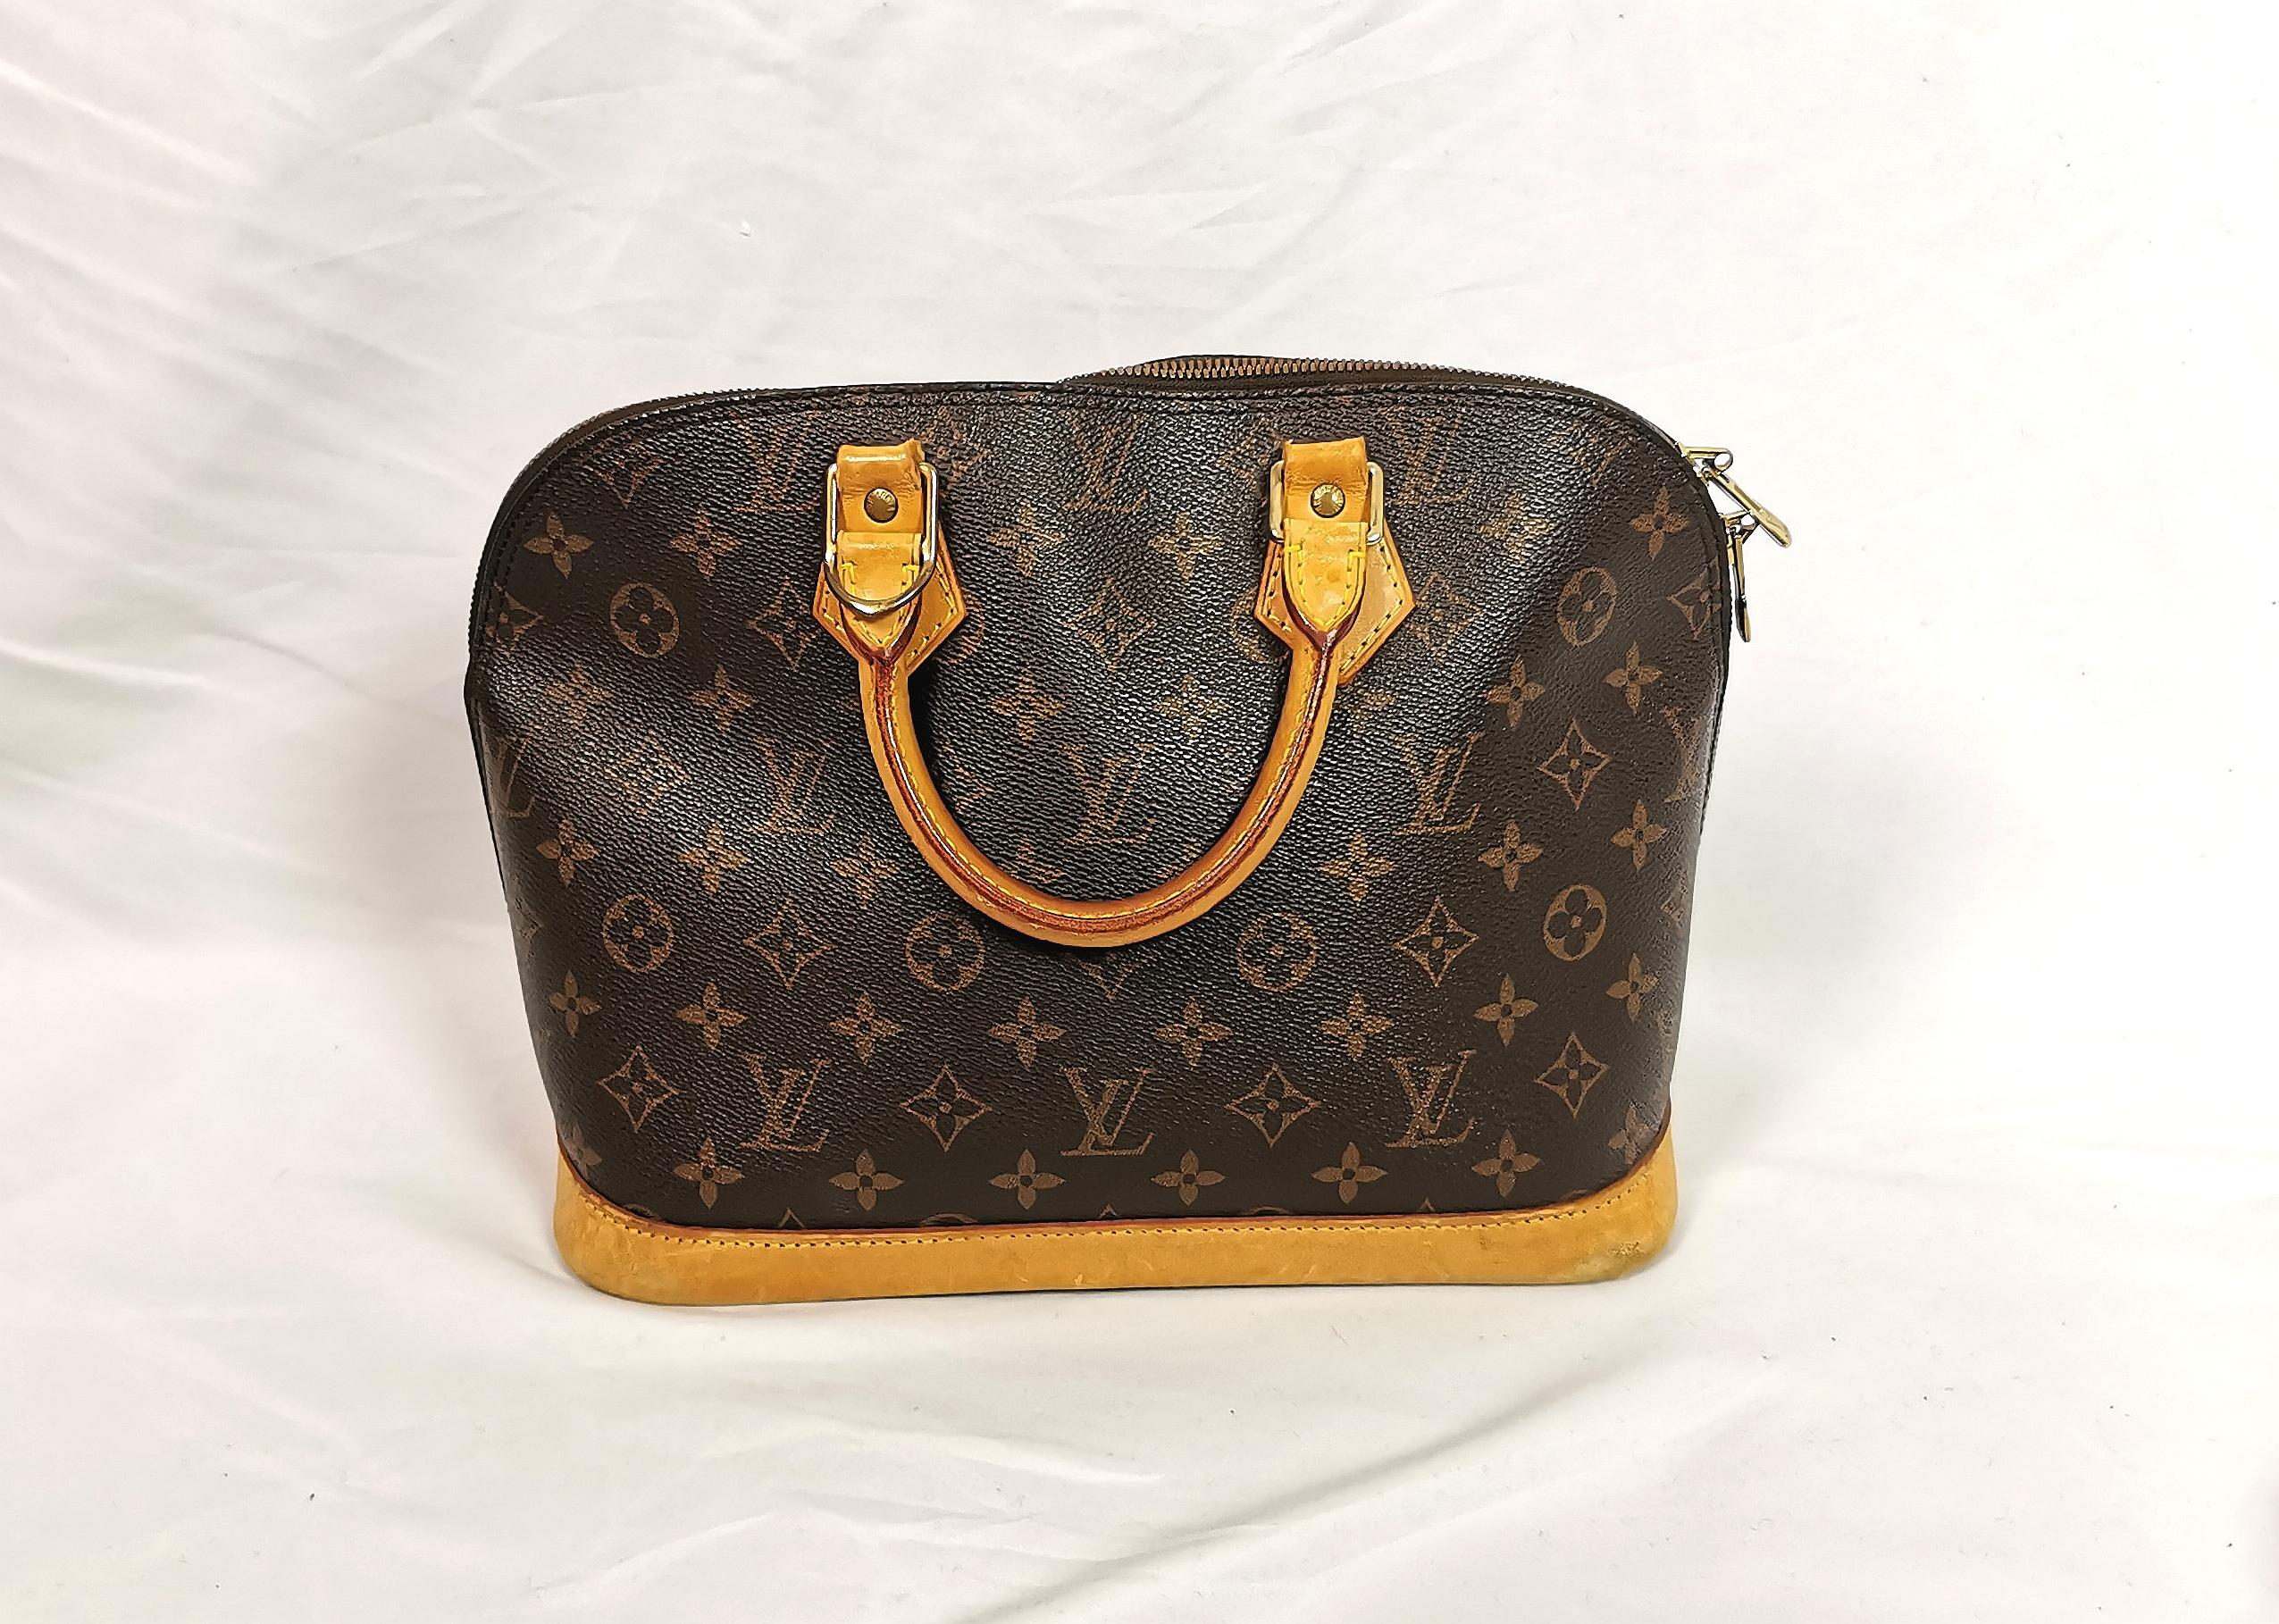 A gorgeous classic, Vintage Louis Vuitton Alma MM top handle handbag.

Coated canvas with the signature LV monogram design, Vachetta leather trim and handles with gold tone hardware.

Lined in brown cotton fabric.

This design is a true staple for